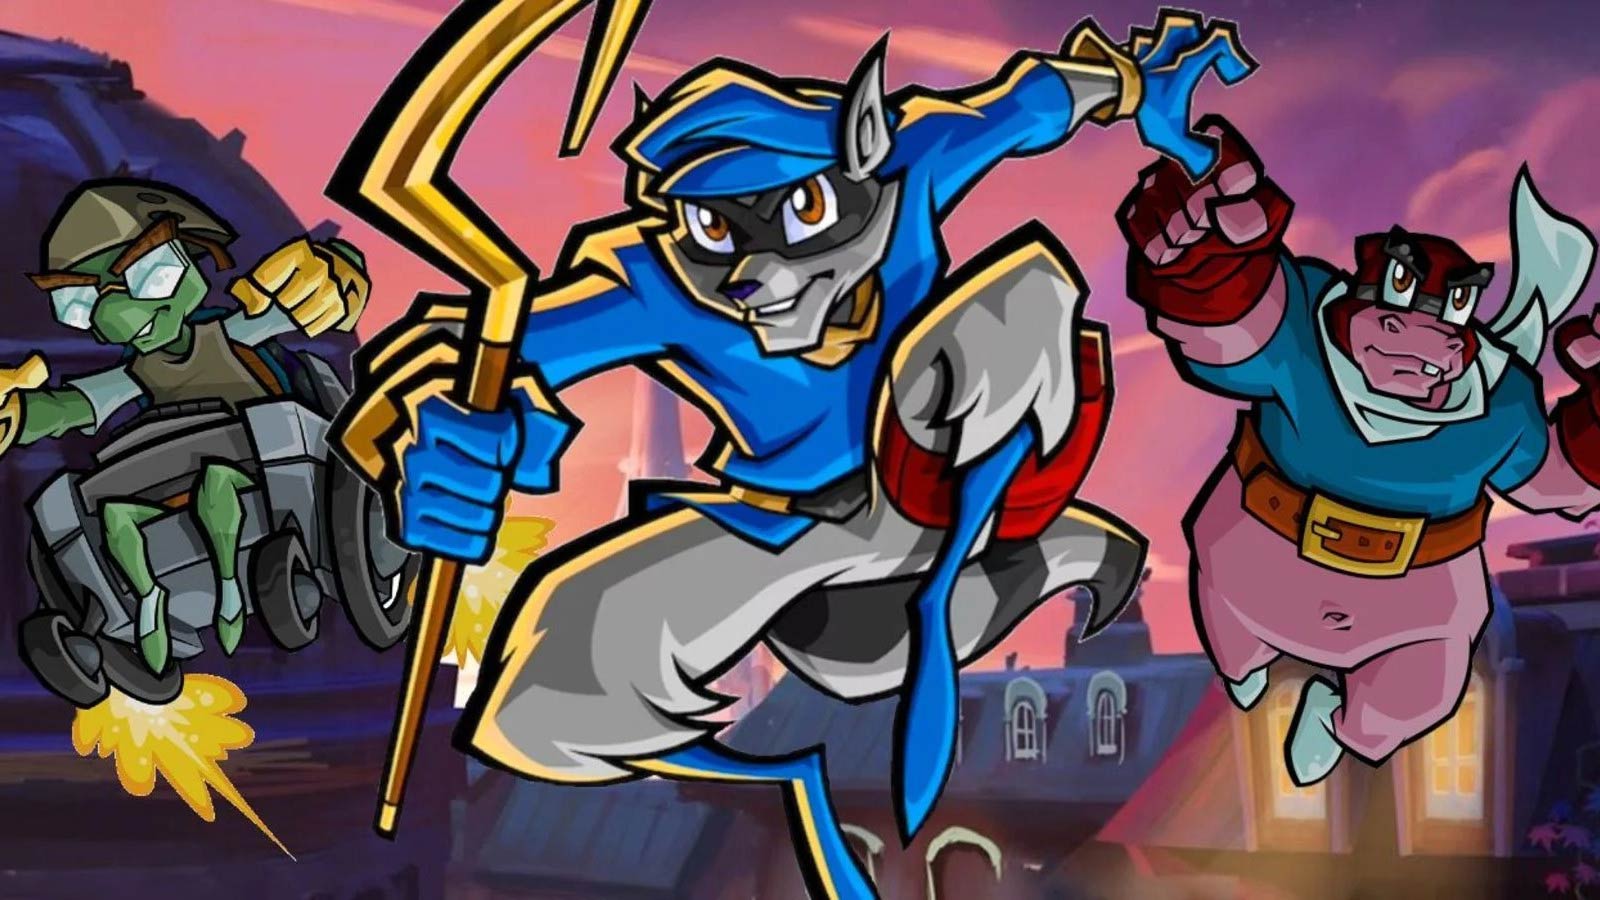 Sly Cooper games are coming to PlayStation Plus Premium